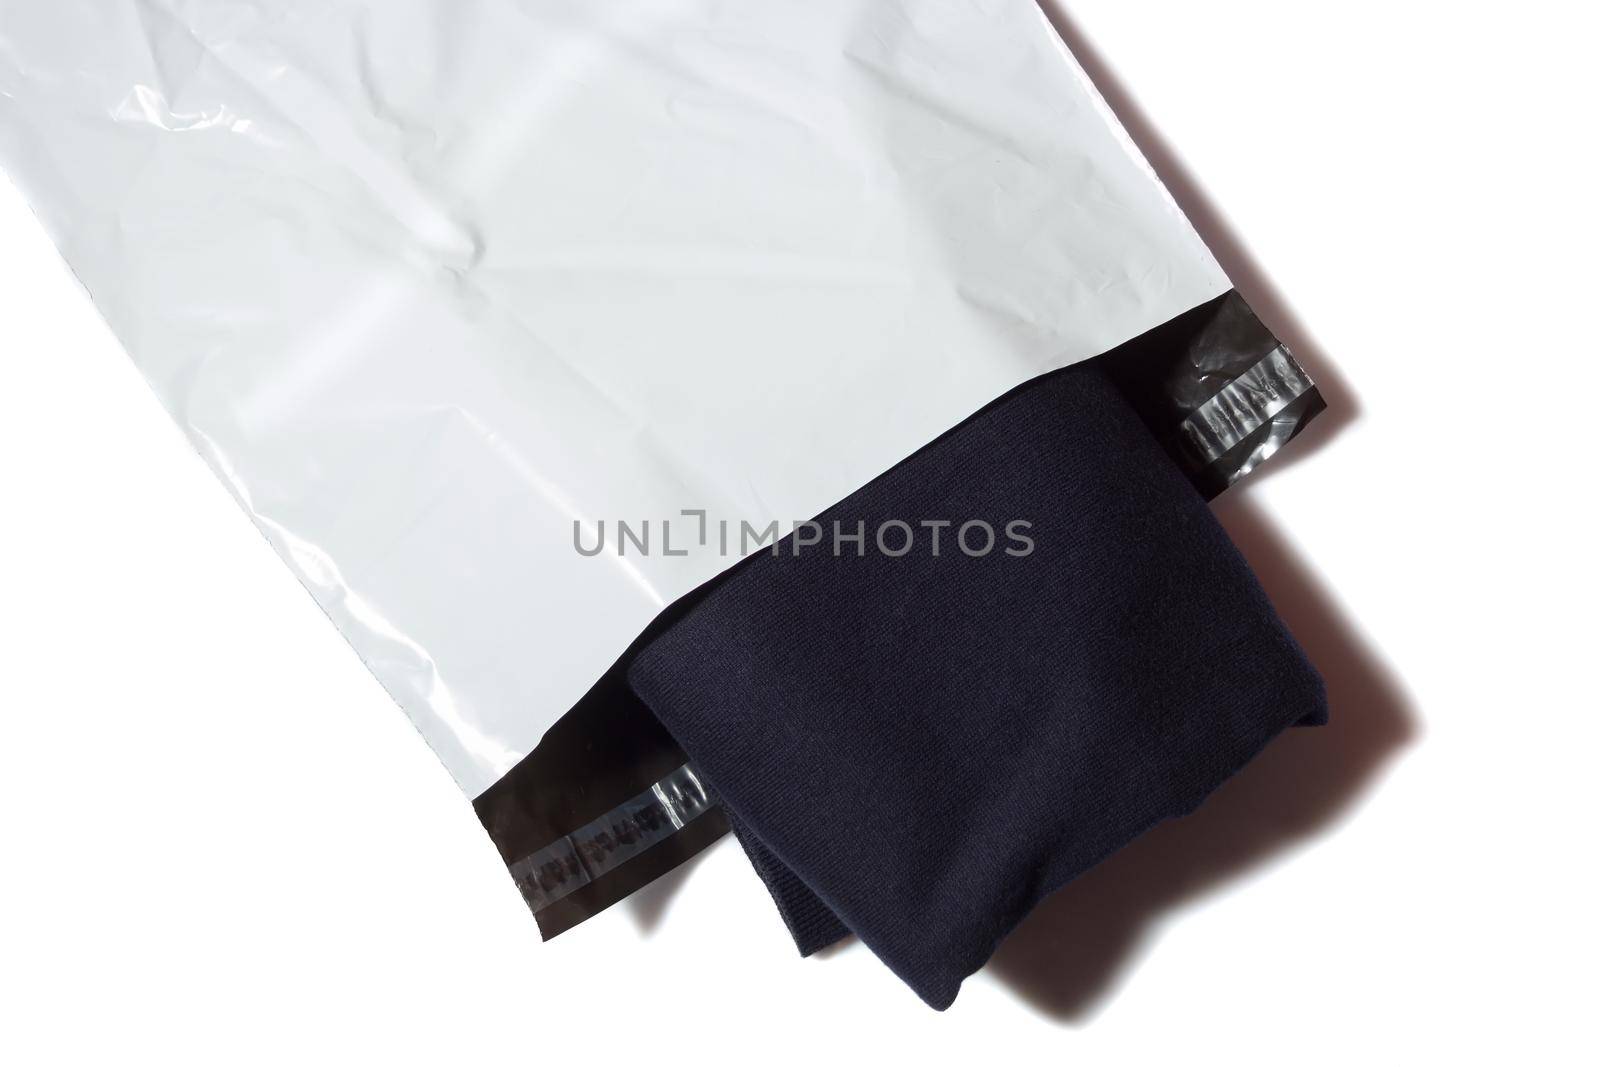 jumper in white mailing bag by AigarsR